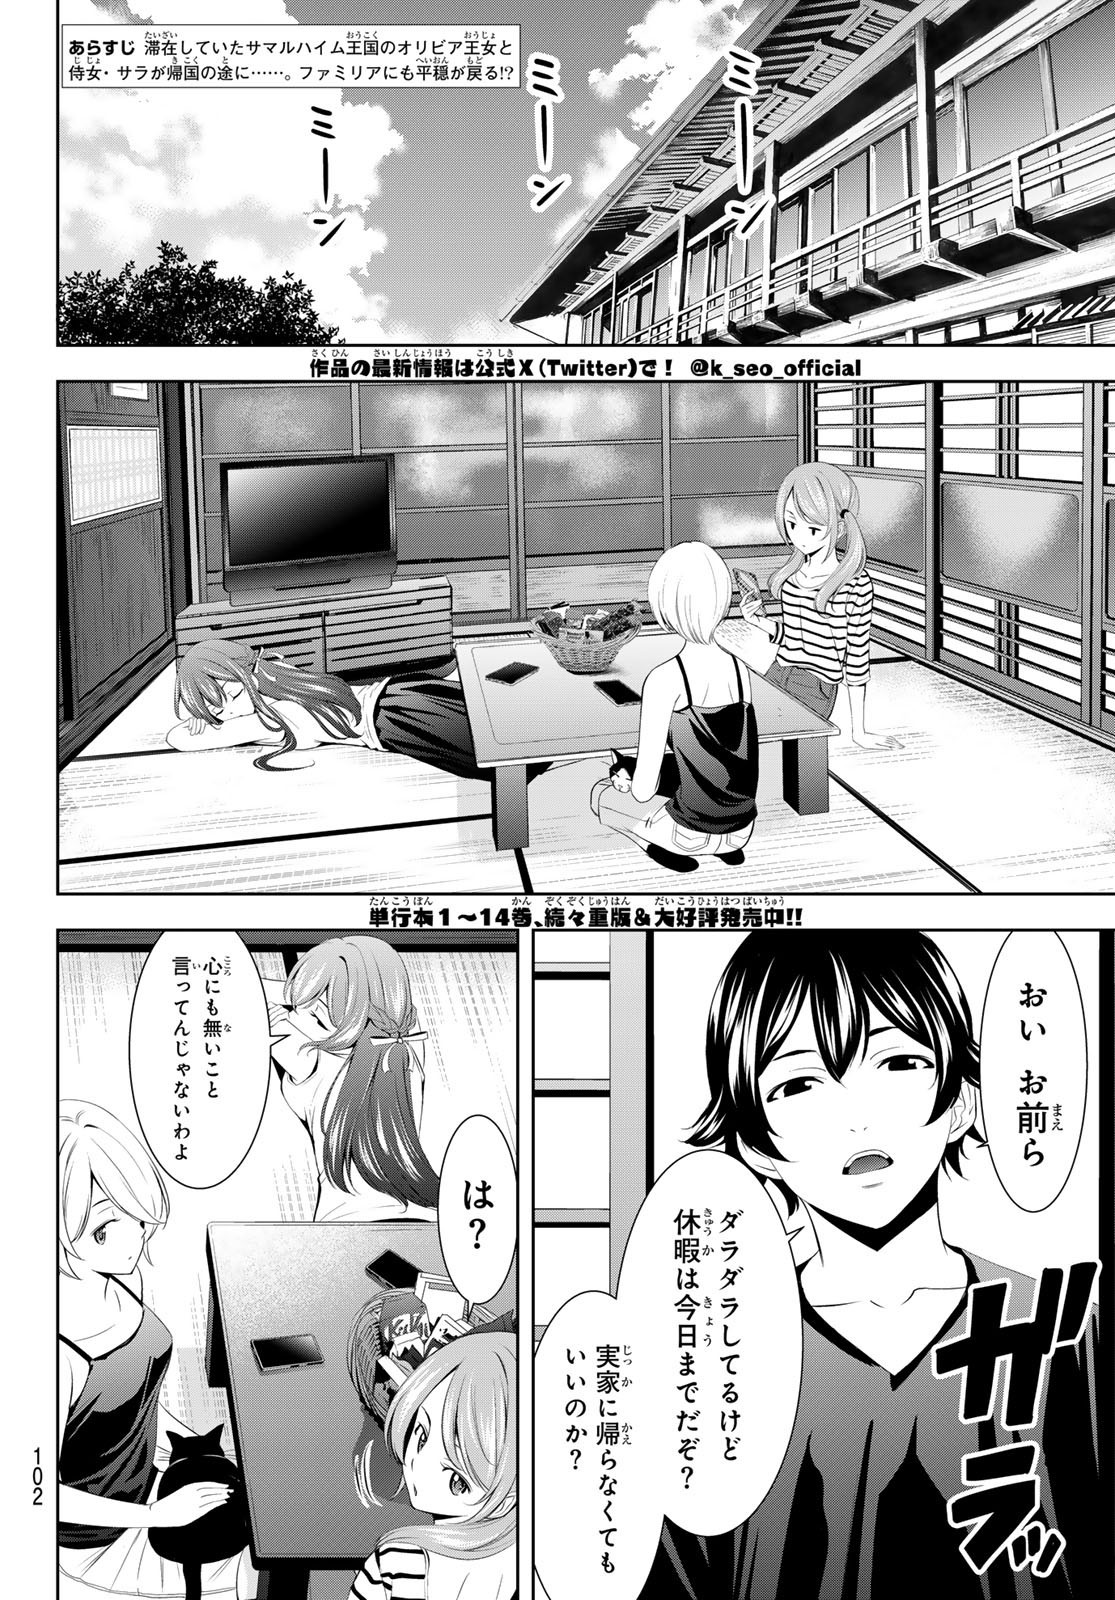 Goddess-Cafe-Terrace - Chapter 147 - Page 2